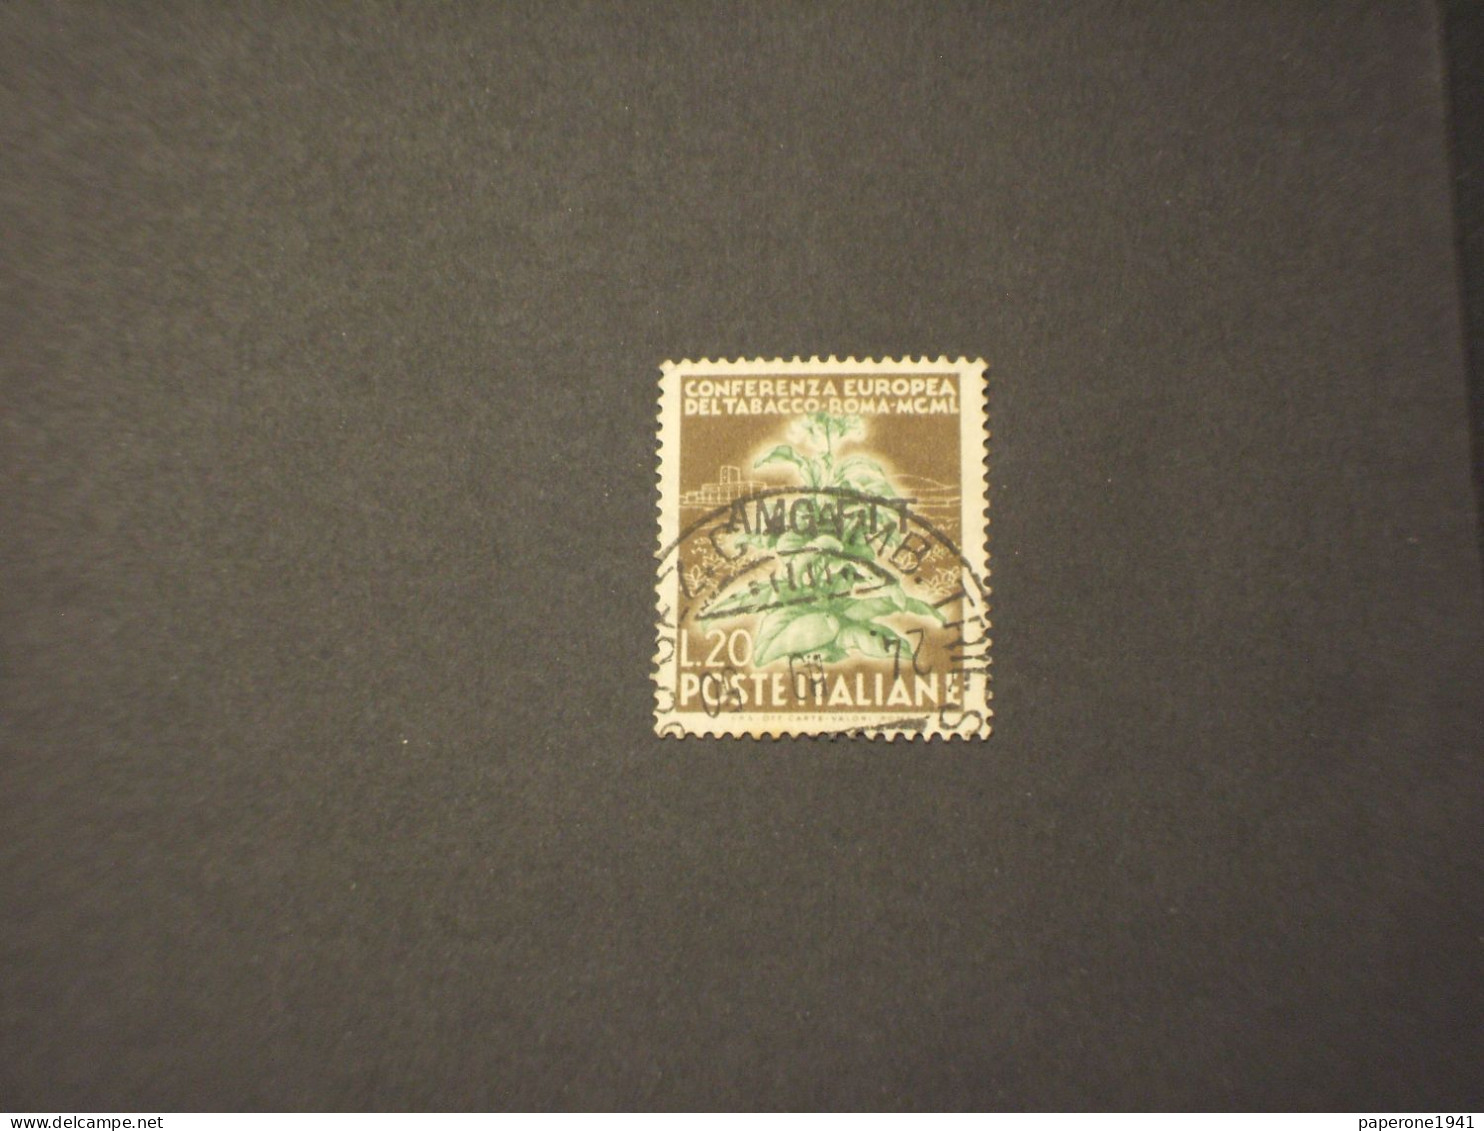 TRIESTE ZONA A-AMG-FTT - 1950 TABACCO L. 20 - TIMBRATO/USED - Afgestempeld